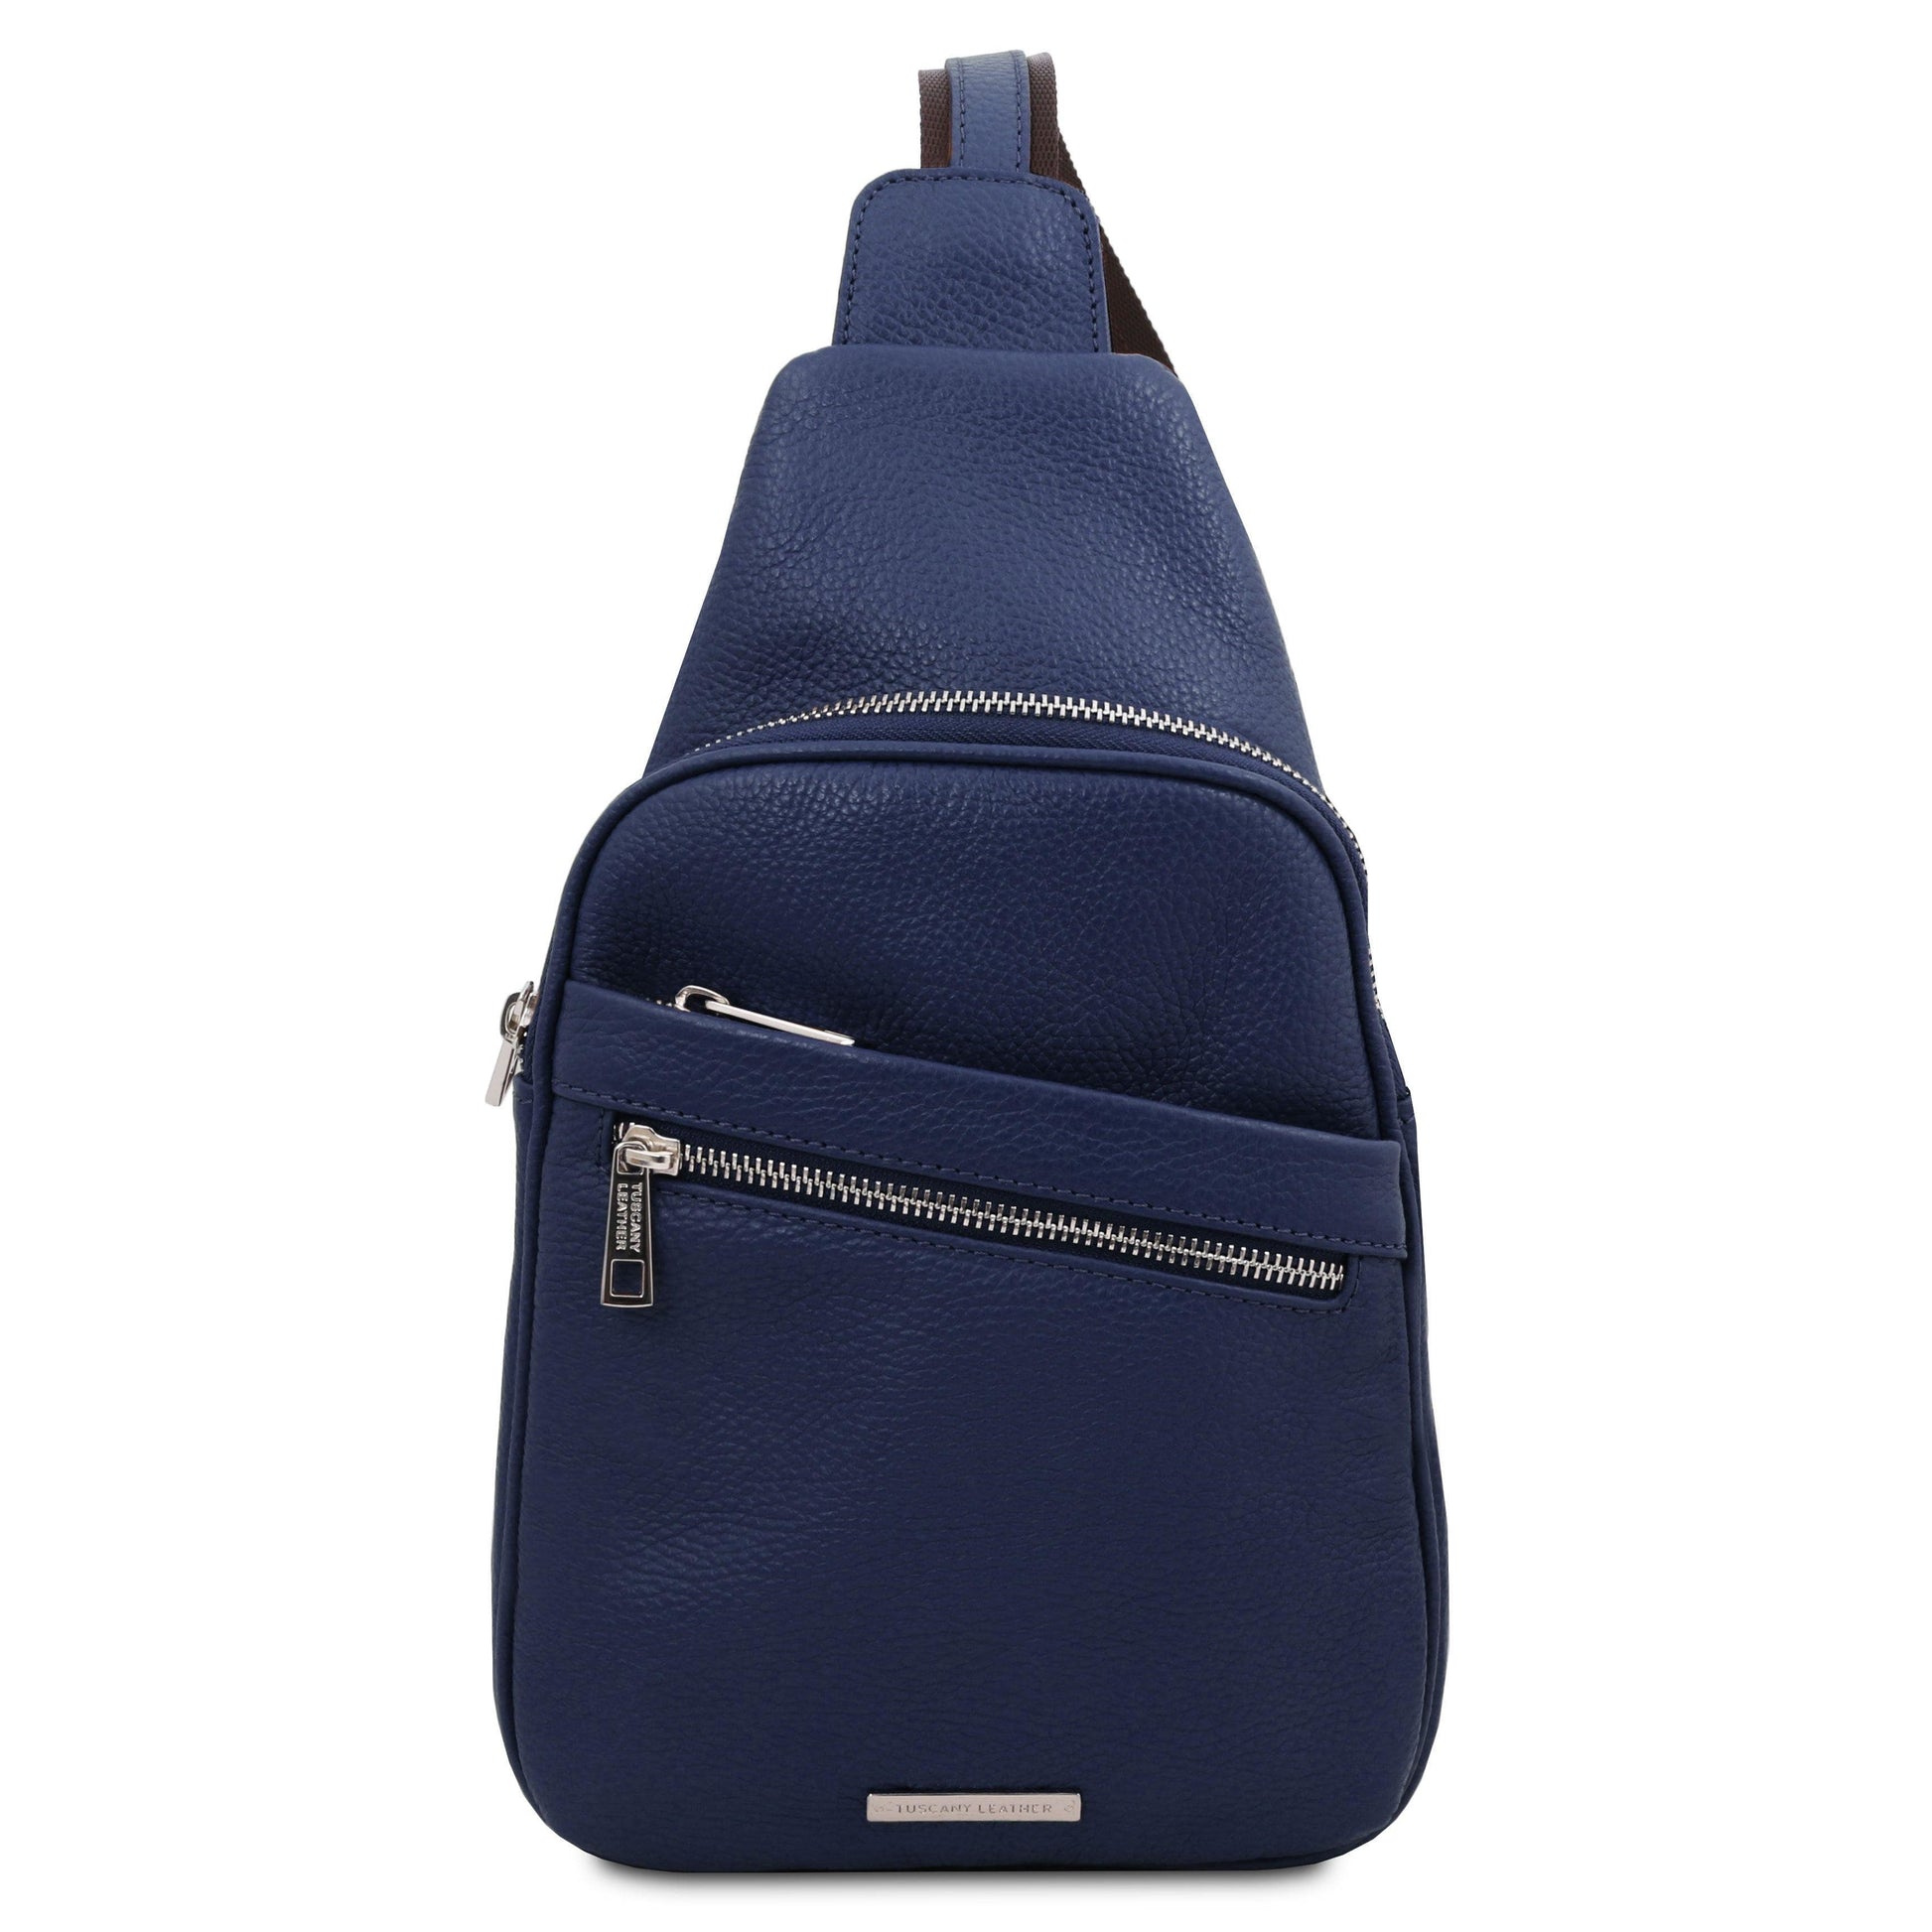 Grainy Leather Rocco Backpack in Black - Men